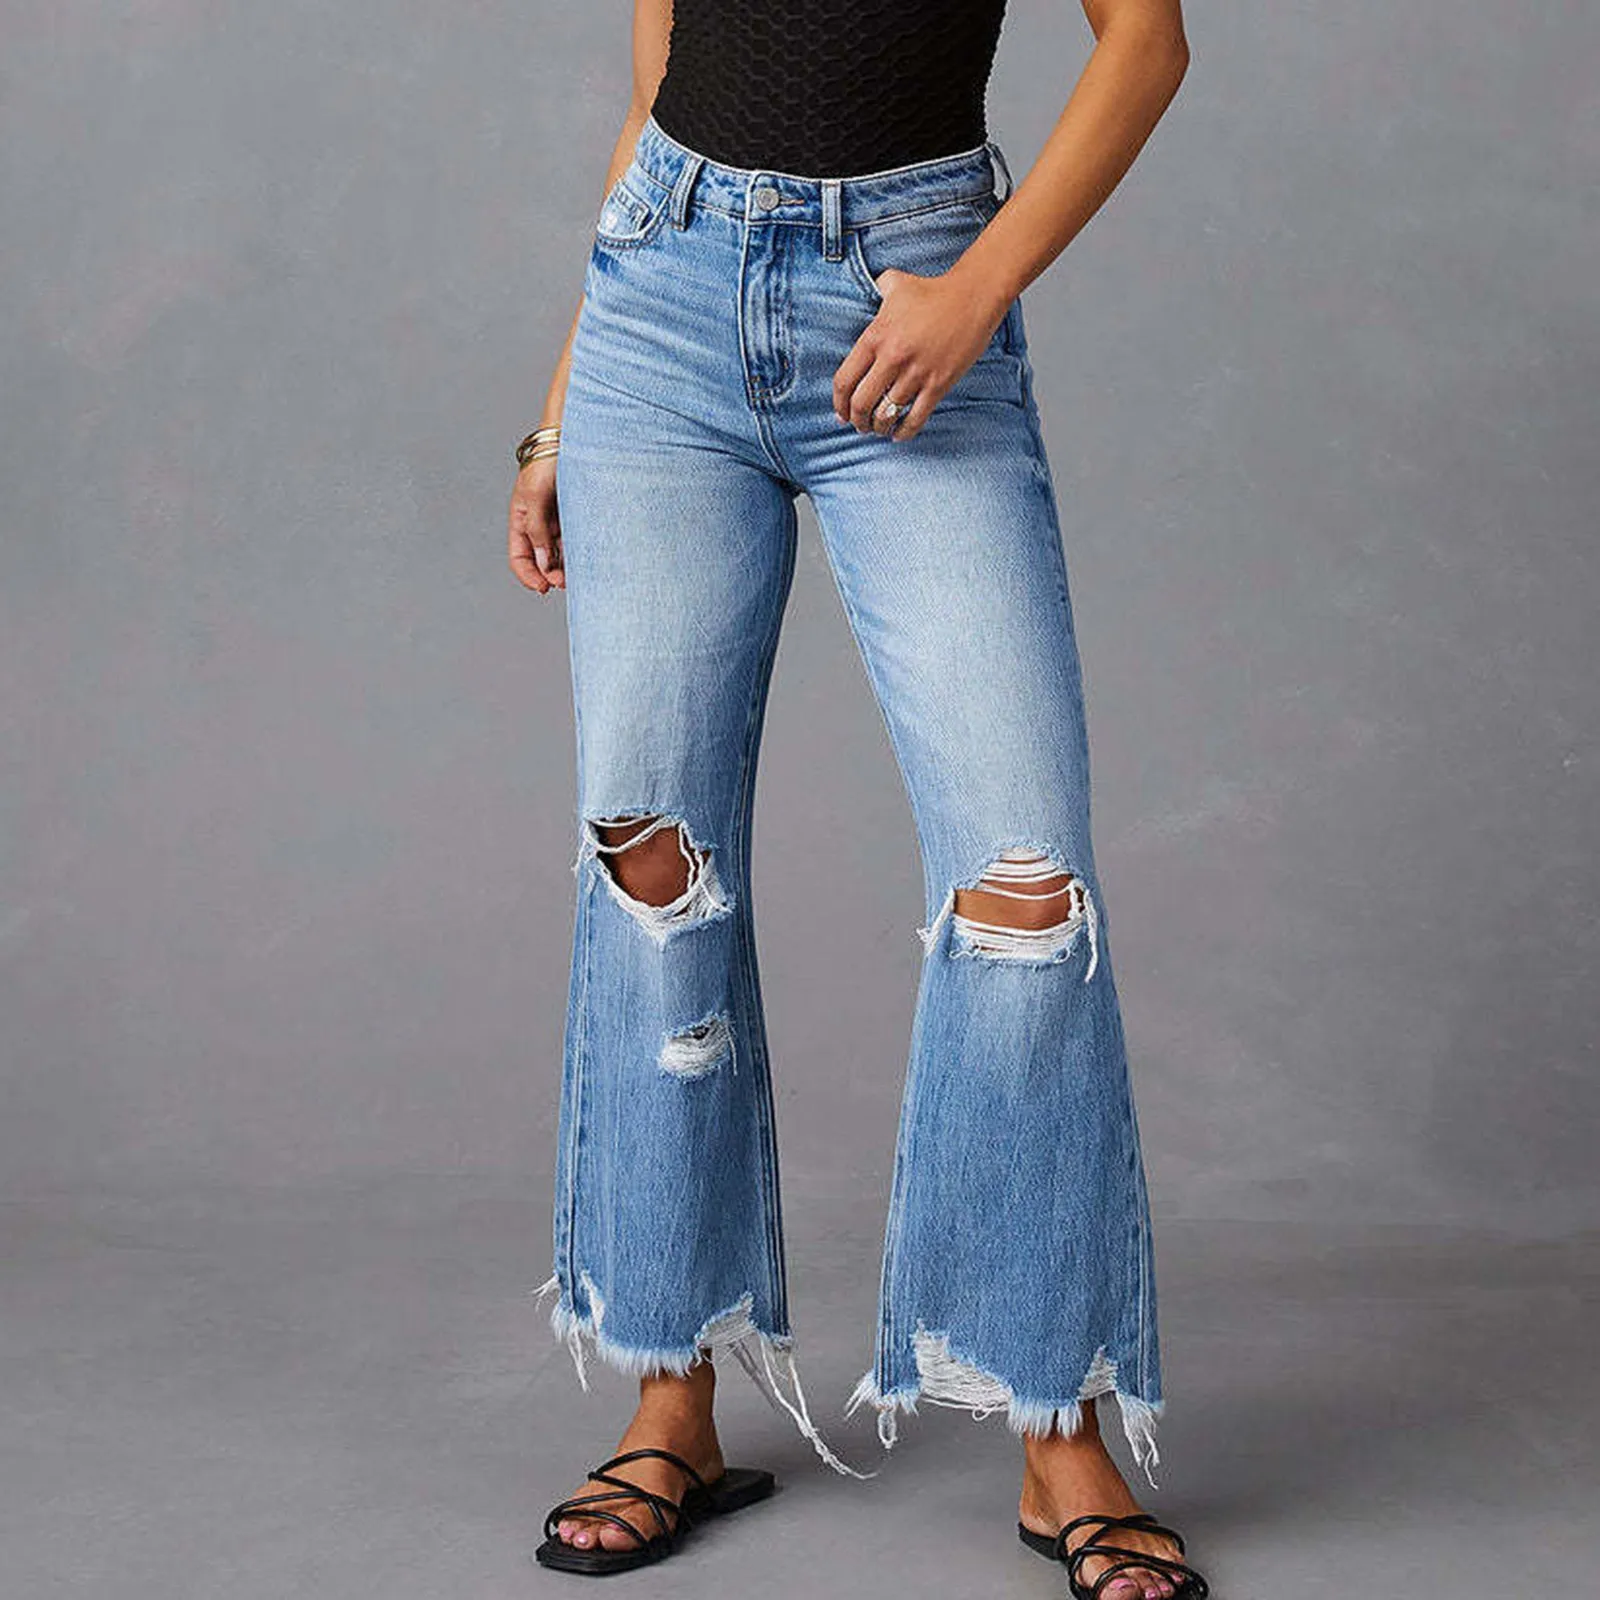 

Fringed Washed Ripped Long Jeans Womens Straight-Leg Casual Pants Wide Straight Leg Pants Casual Jogger Sports Cargo Trousers